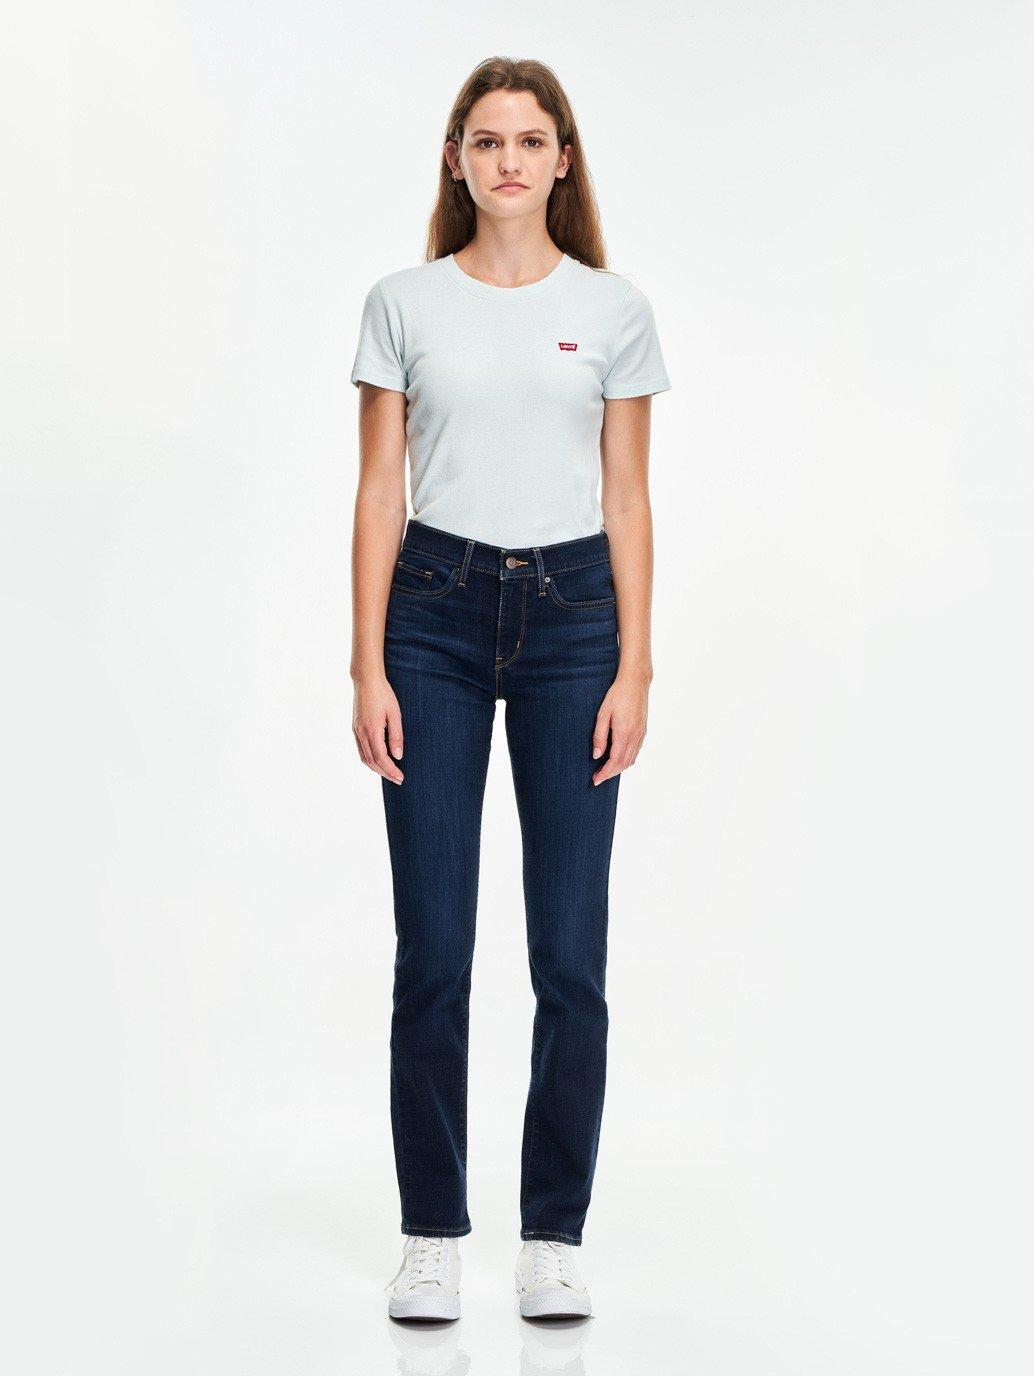 Buy Levi's® Women's 312 Shaping Slim Jeans | Levi's® Official Online Store  MY